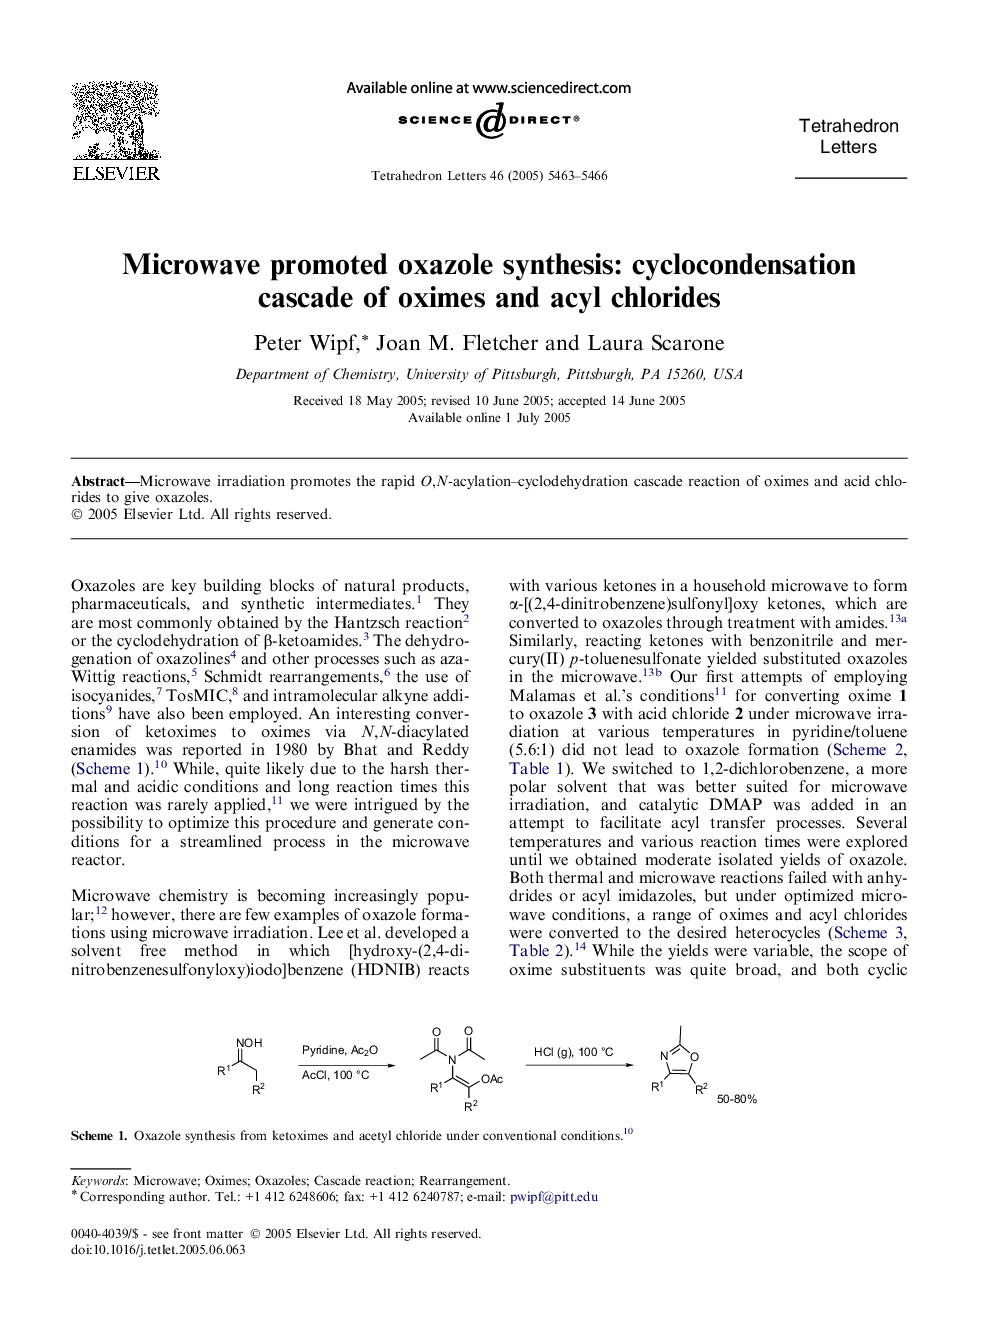 Microwave promoted oxazole synthesis: cyclocondensation cascade of oximes and acyl chlorides